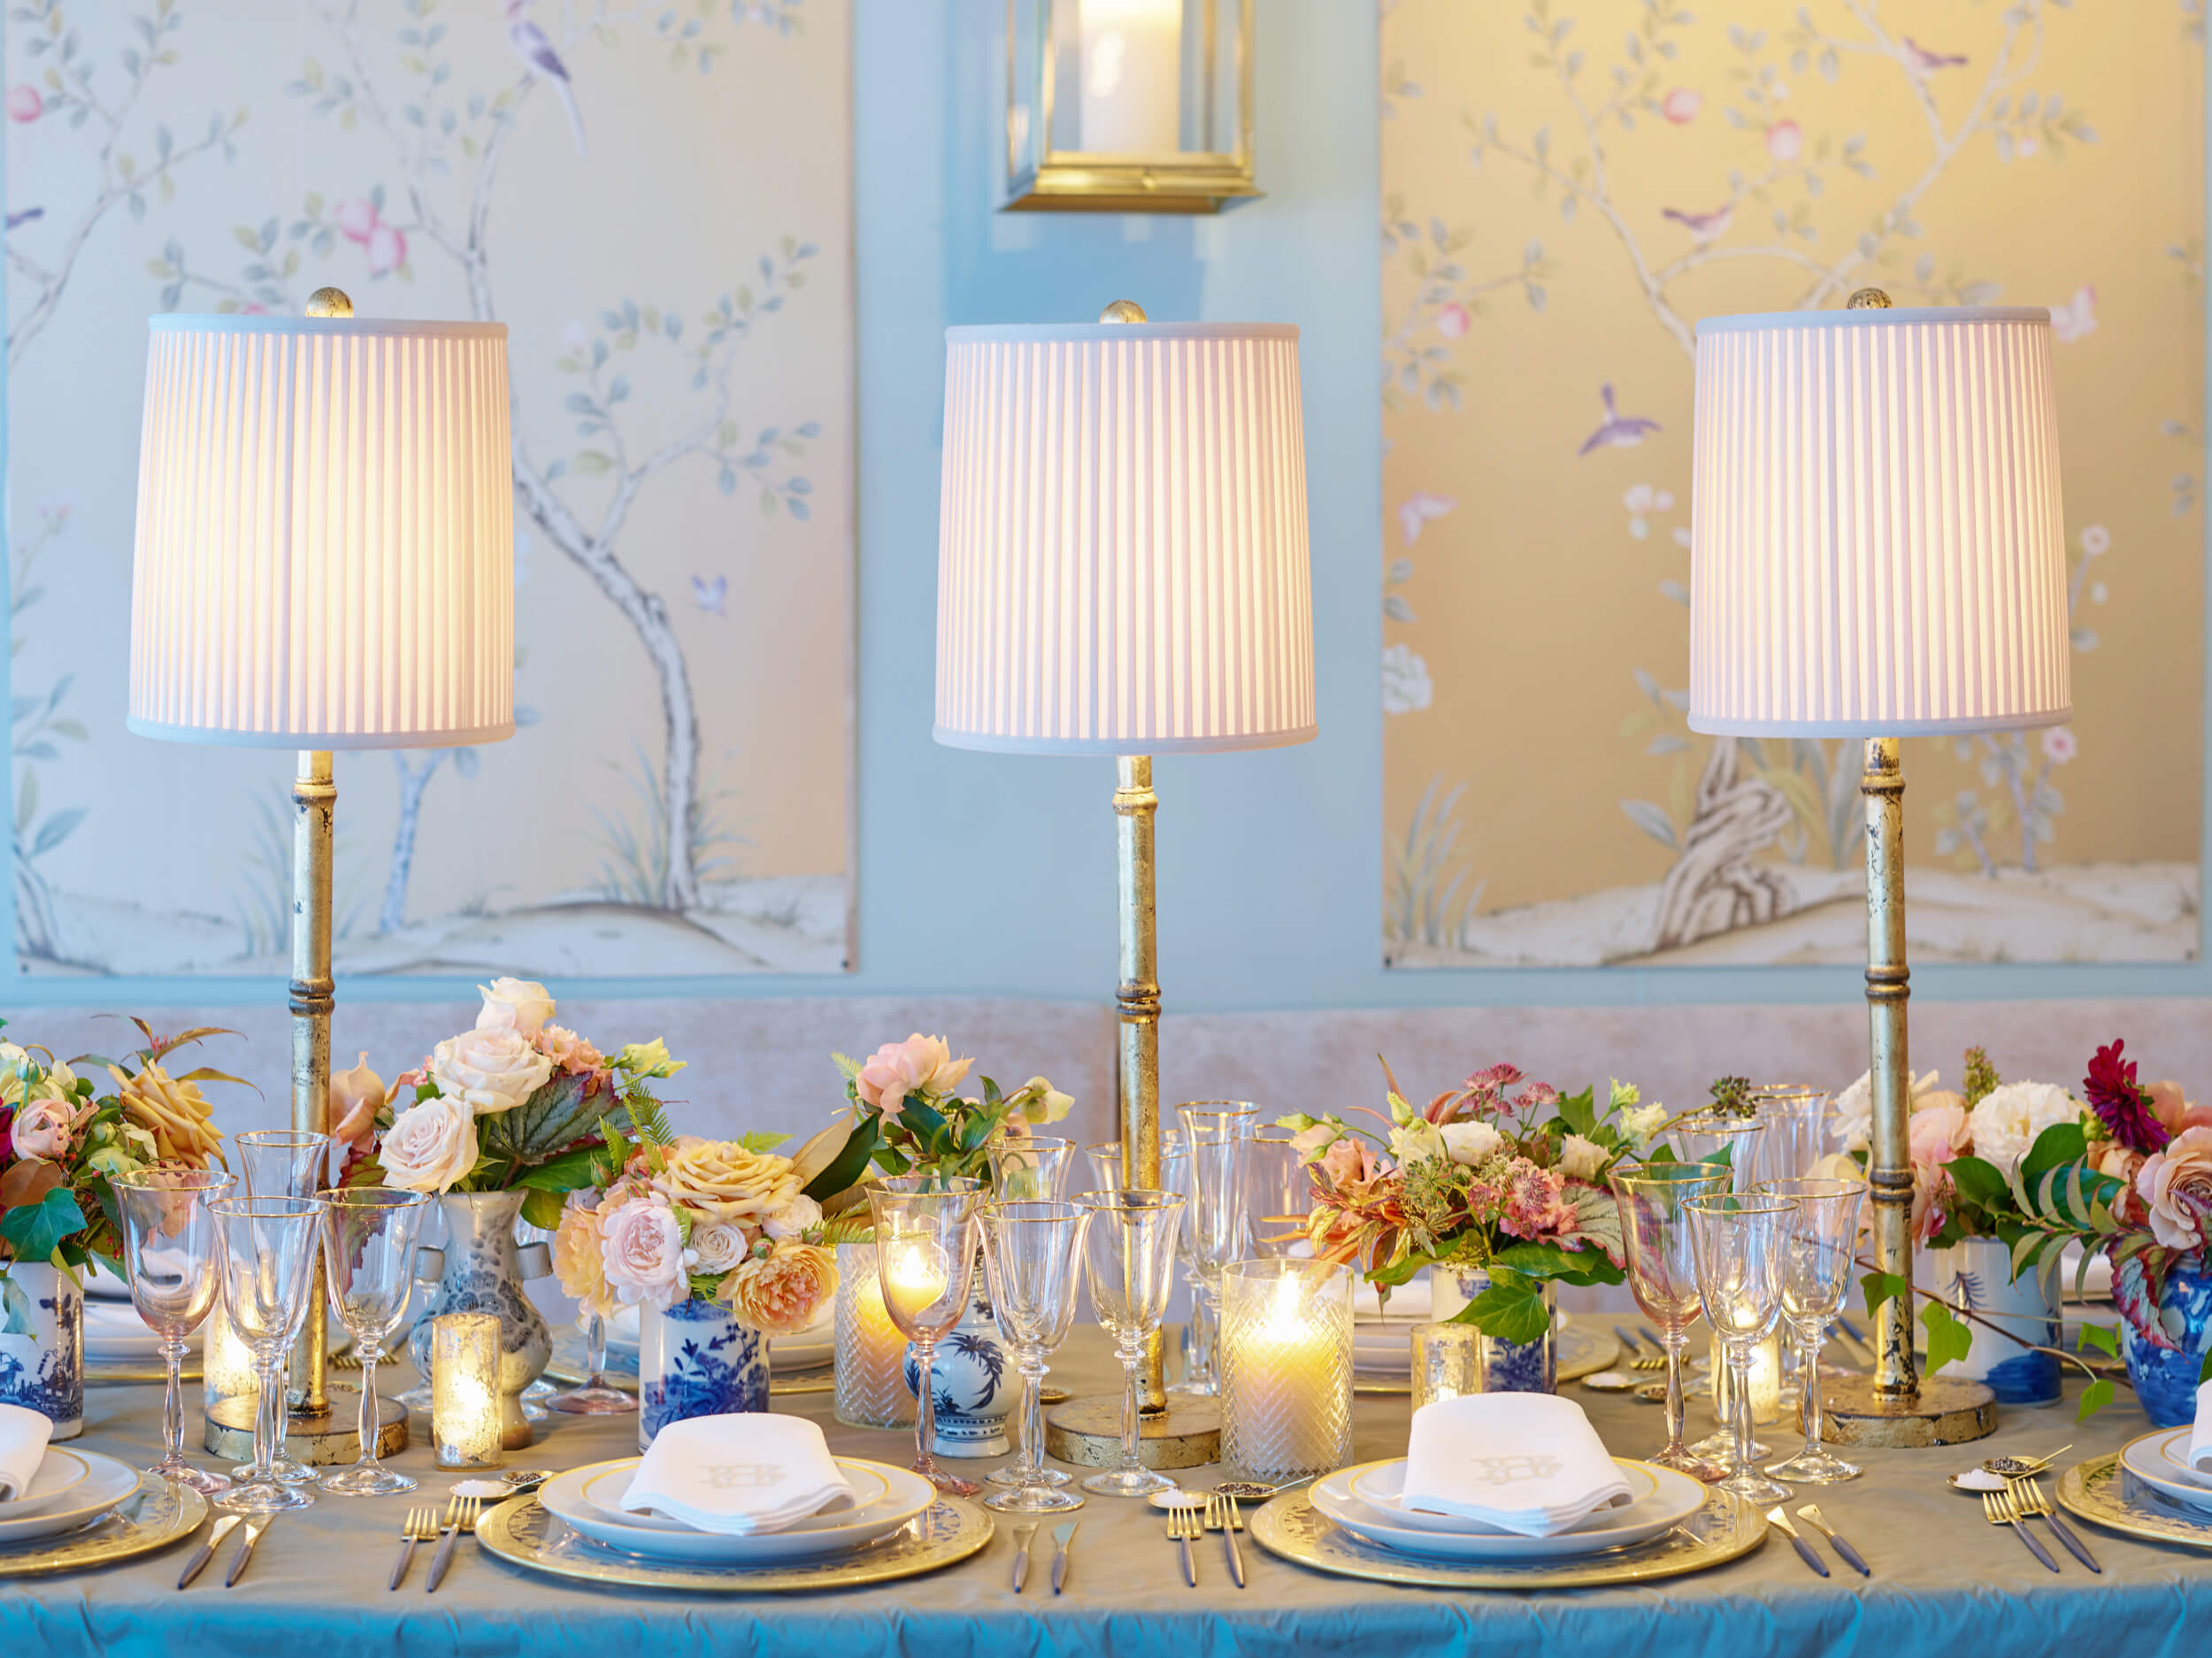 sustainable table decor using lamps and glassware 